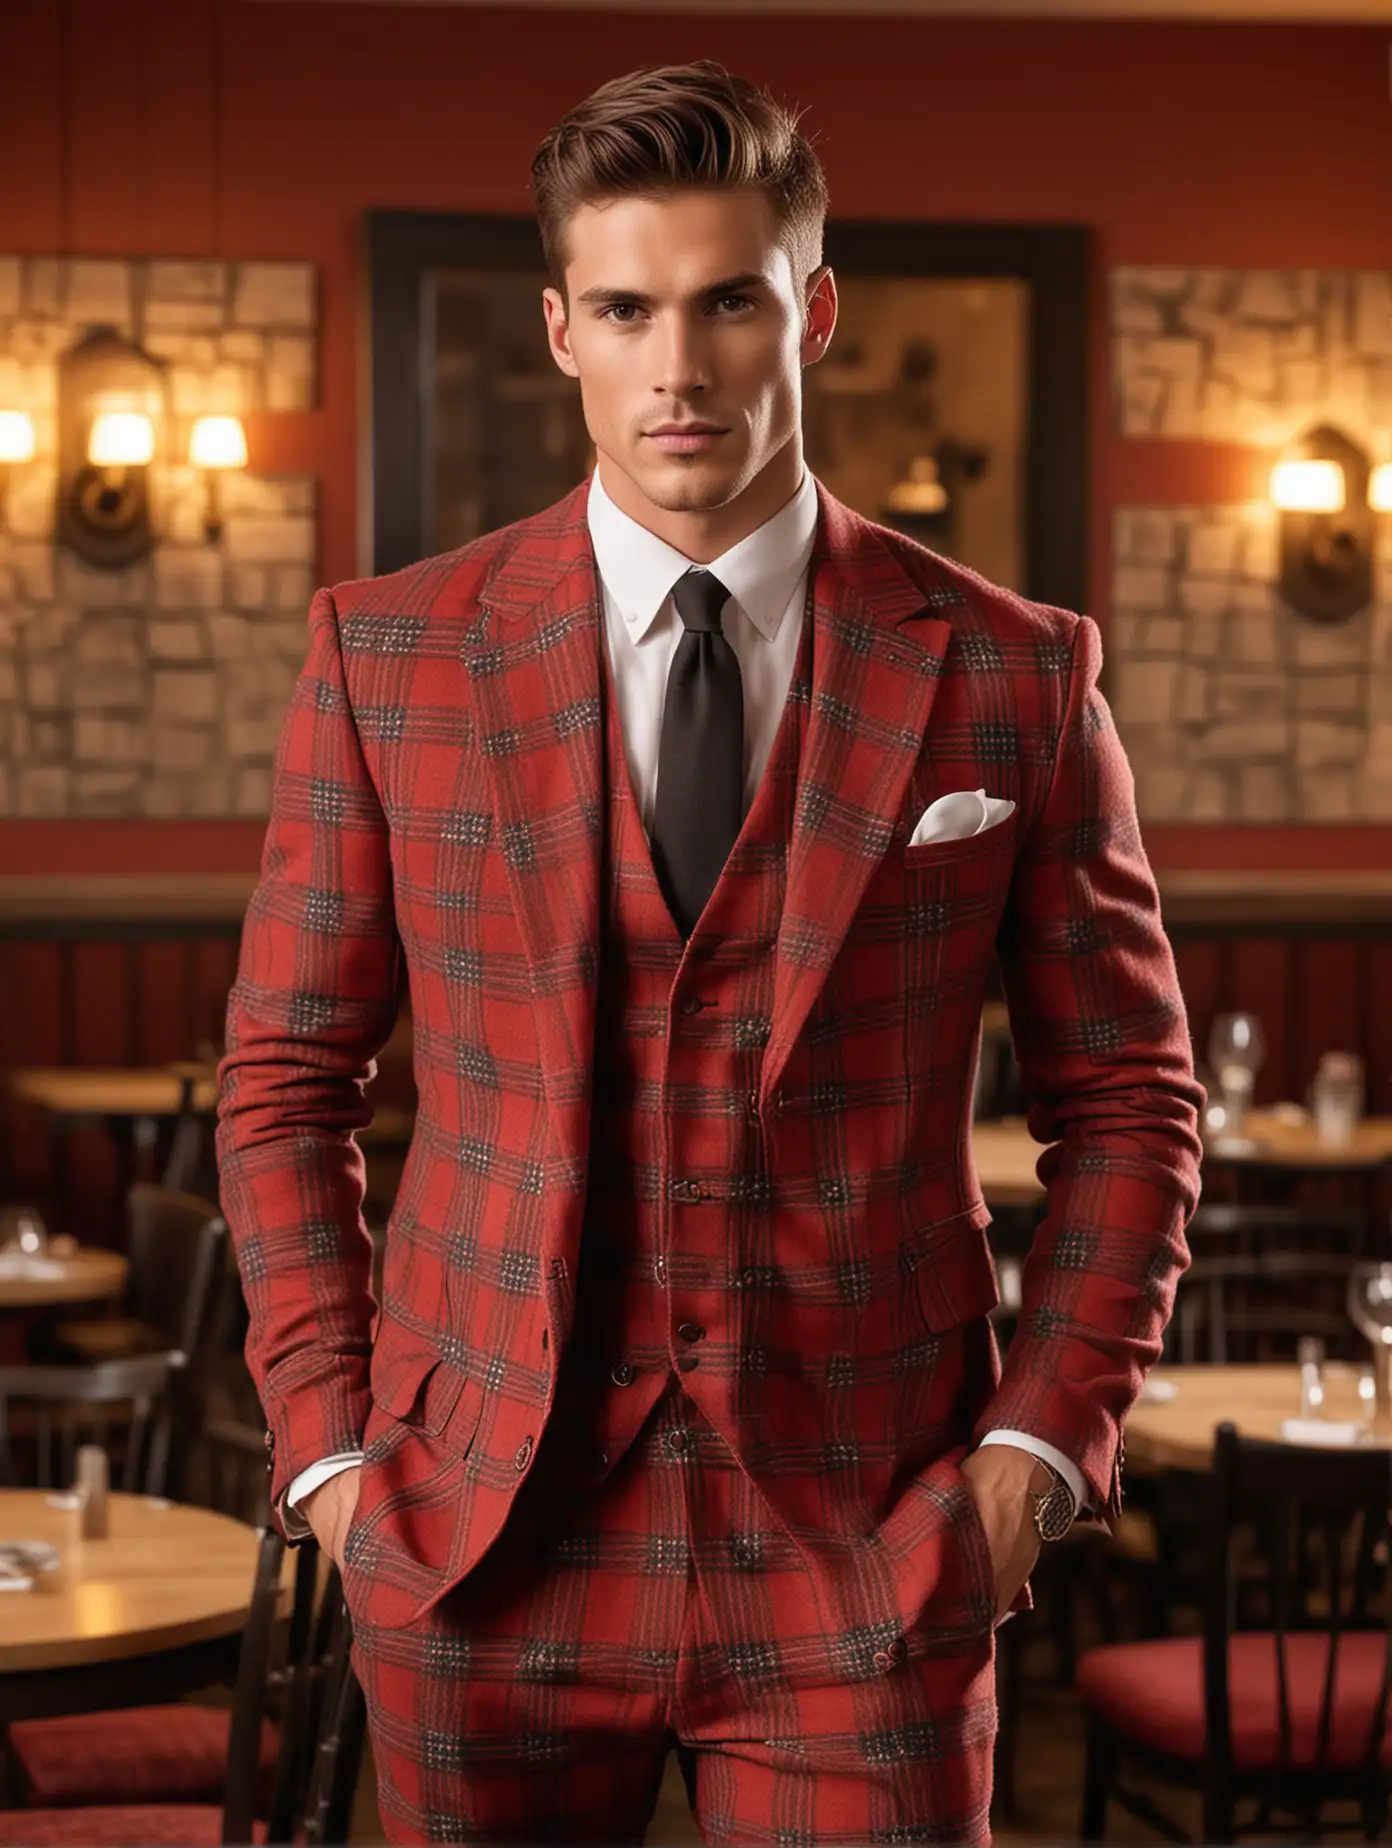 British, gorgeous red plaid suit, Western restaurant，sexy muscular male model ,
Full body shot, soft lighting, warm colors, soft shadows, professional portrait photography,
Natural makeup, perfect figure, beautiful and confident
